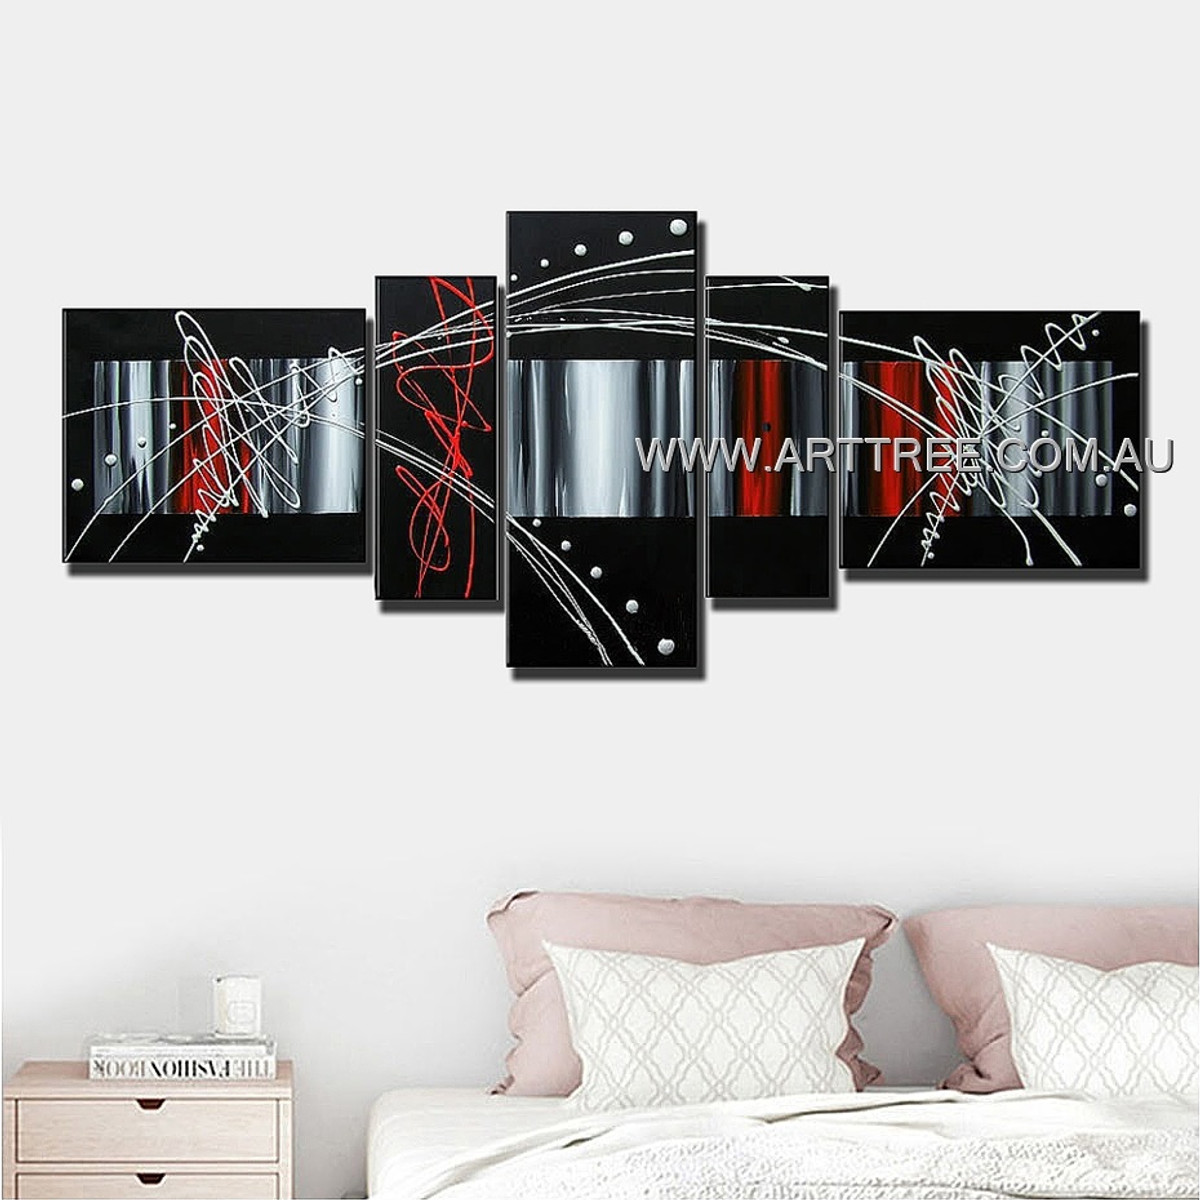 Black White Red Grey Blend Abstract Modern 5 Piece Multi Panel Canvas Oil Painting Wall Art Set For Room Wall Ornament